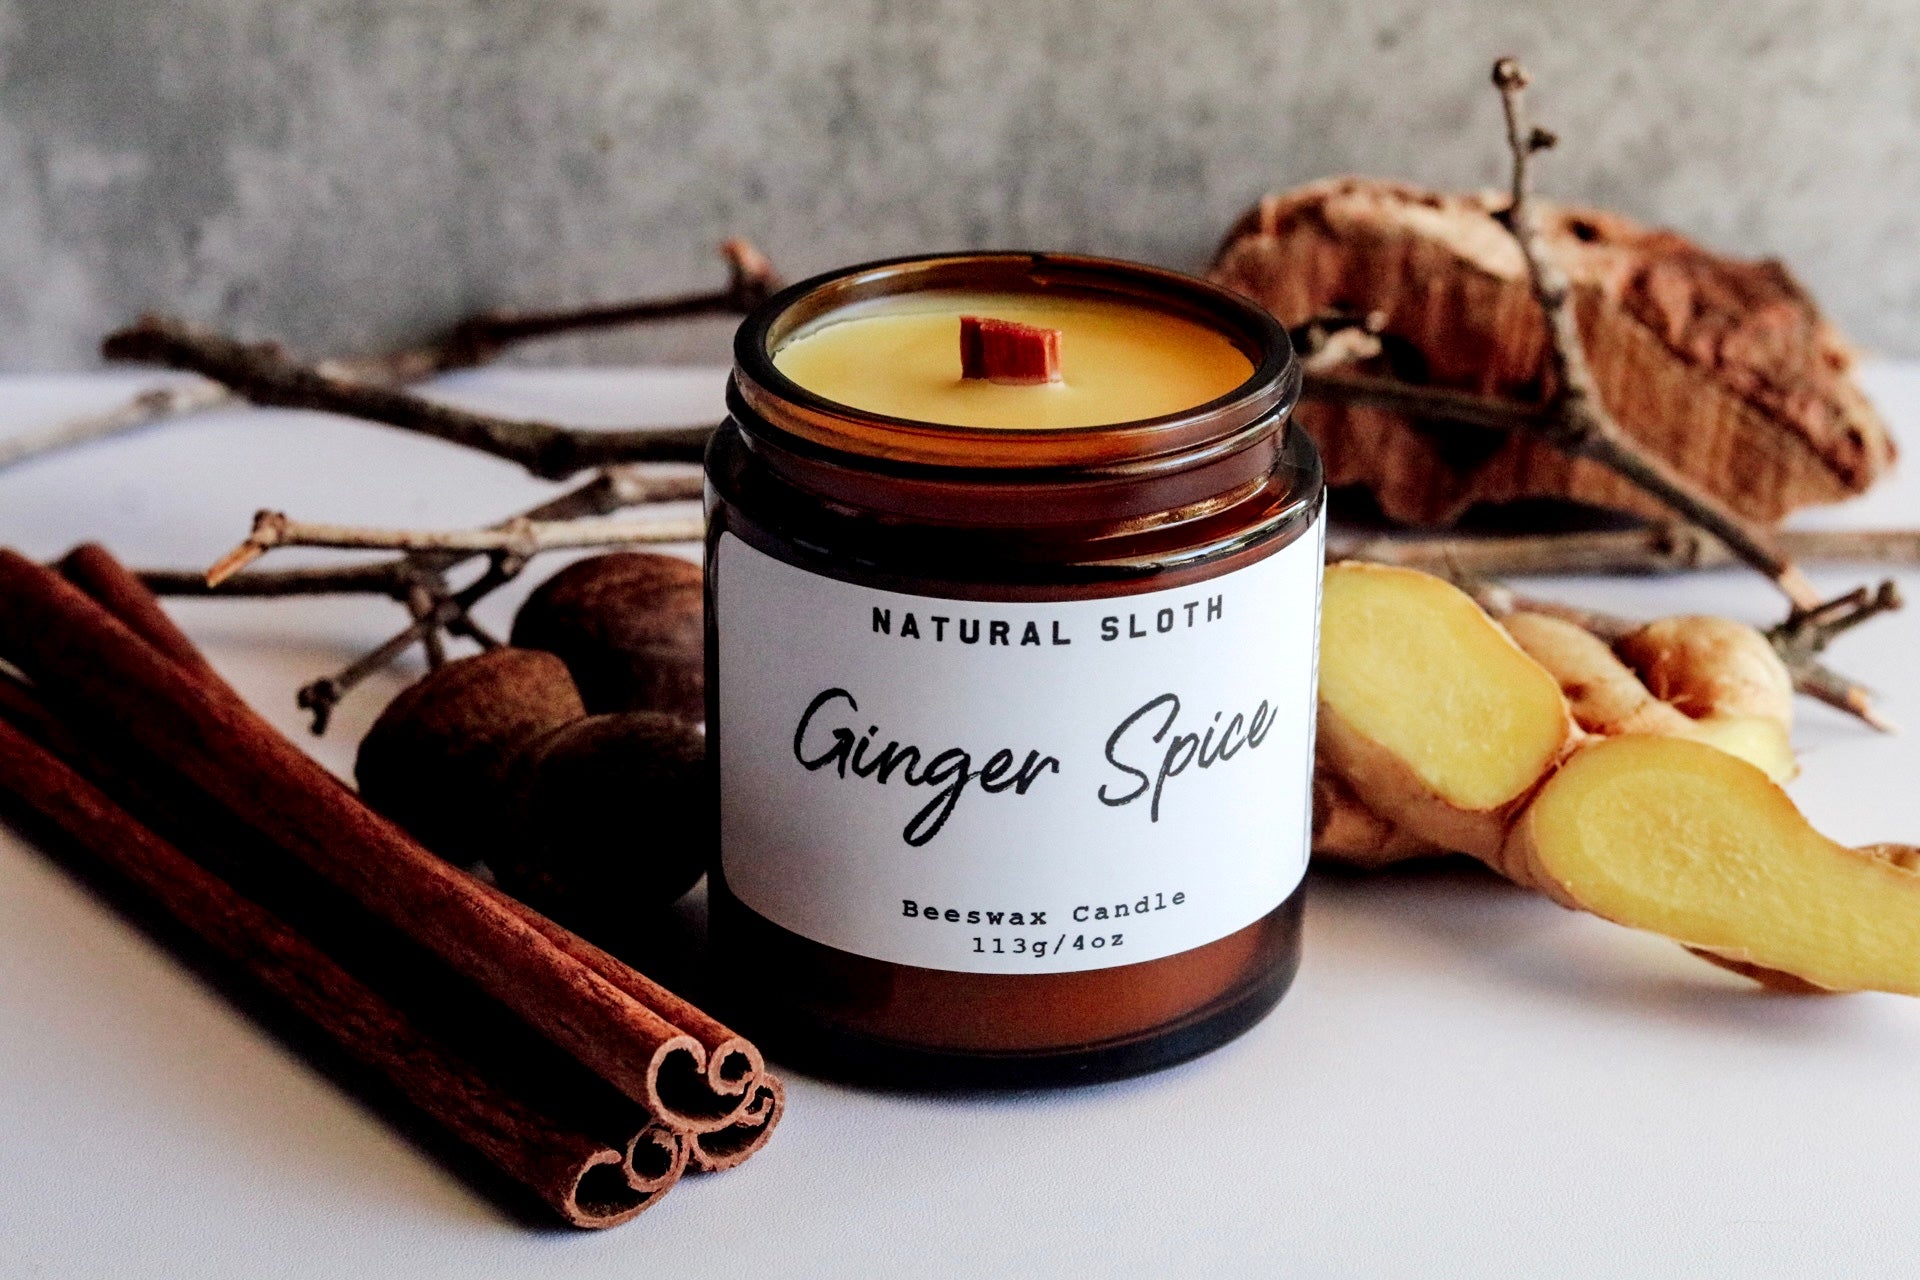 Ginger Spice Beeswax Candles